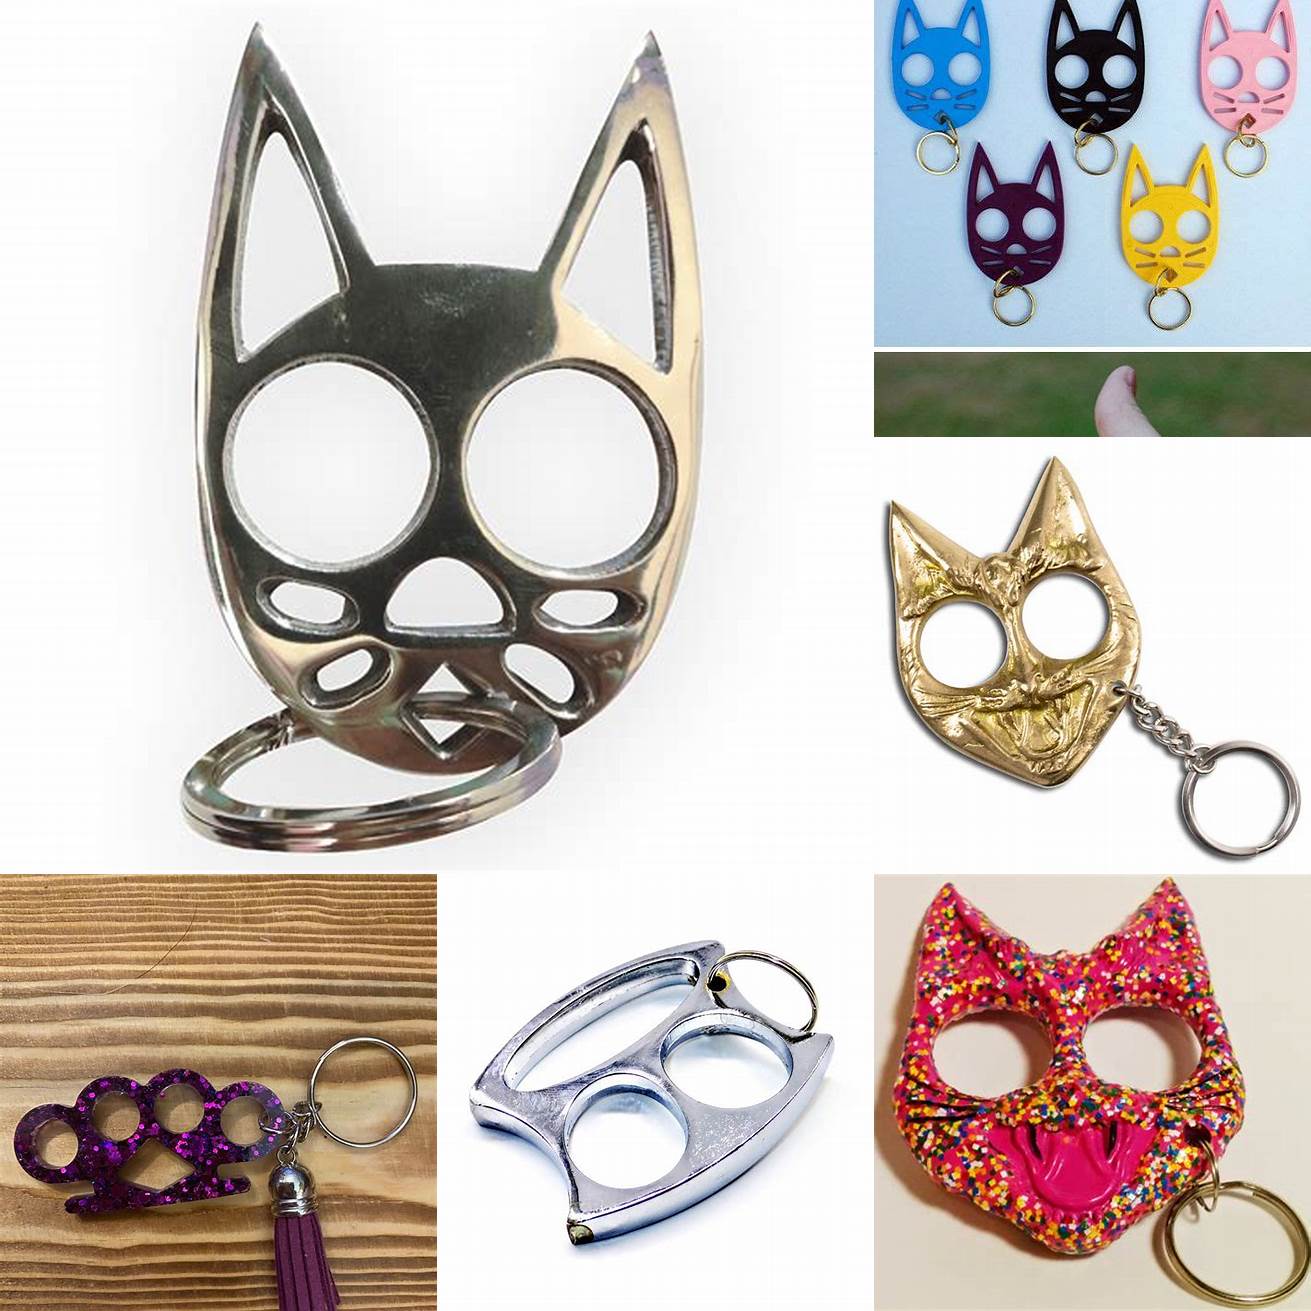 Image 3 Cat Brass Knuckles Keychain as a Decorative Item